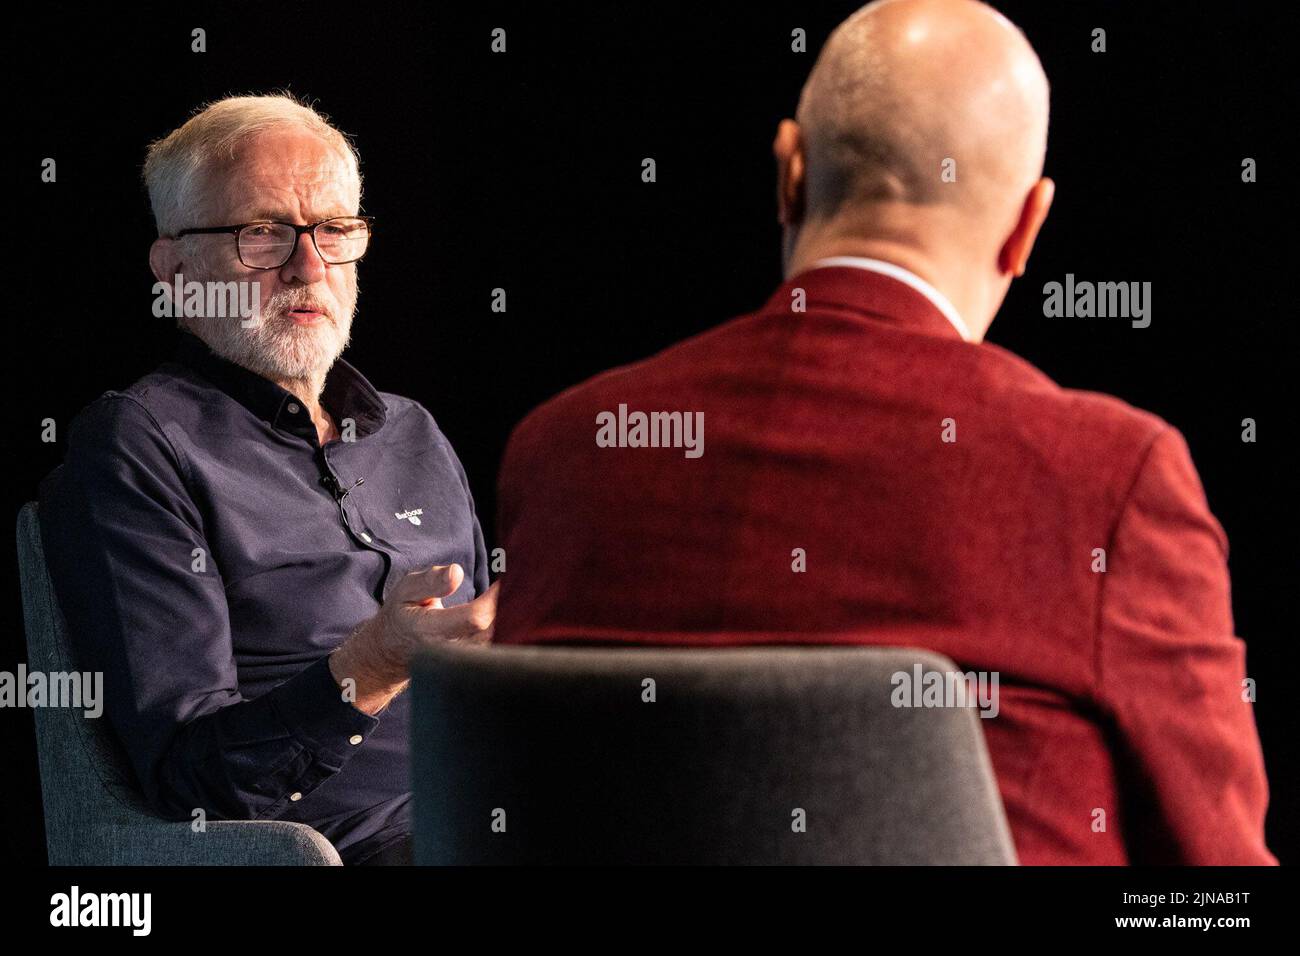 Edinburgh, United Kingdom. 10 August, 2022 Pictured: Former Labour leader, Jeremy Corbyn, is interviewed by LBC’s Iain Dale at the Edinburgh Fringe Festival as part of the All Talk series of interviews by the broadcaster. Corbyn told the audience that he feels vindicated by the Forde Report in how he dealt with anti-semitism while leader. Credit: Rich Dyson/Alamy Live News Stock Photo